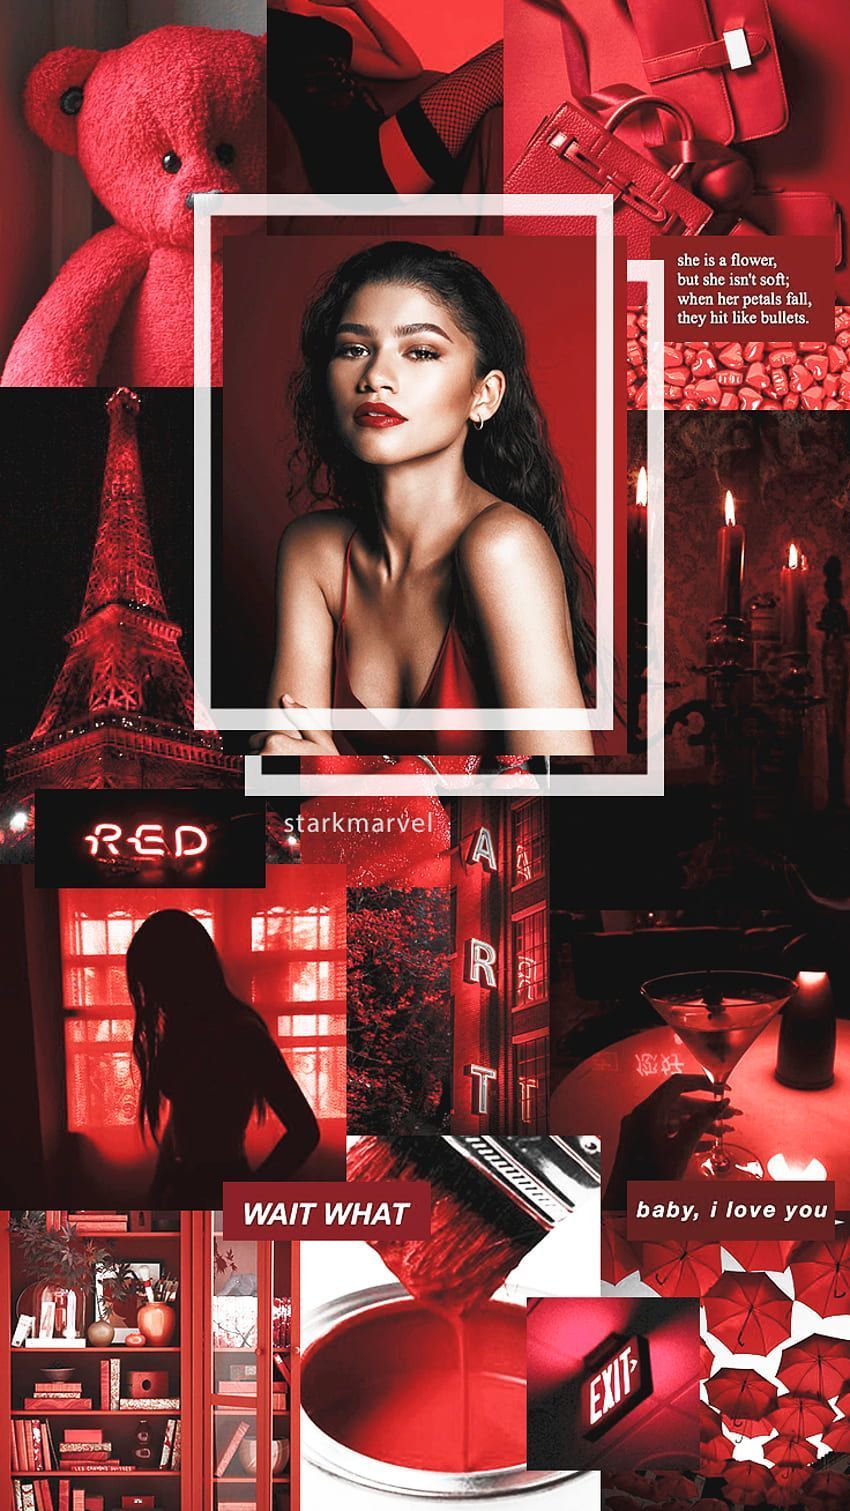 Red aesthetic wallpaper for phone with a girl and red elements. - Zendaya